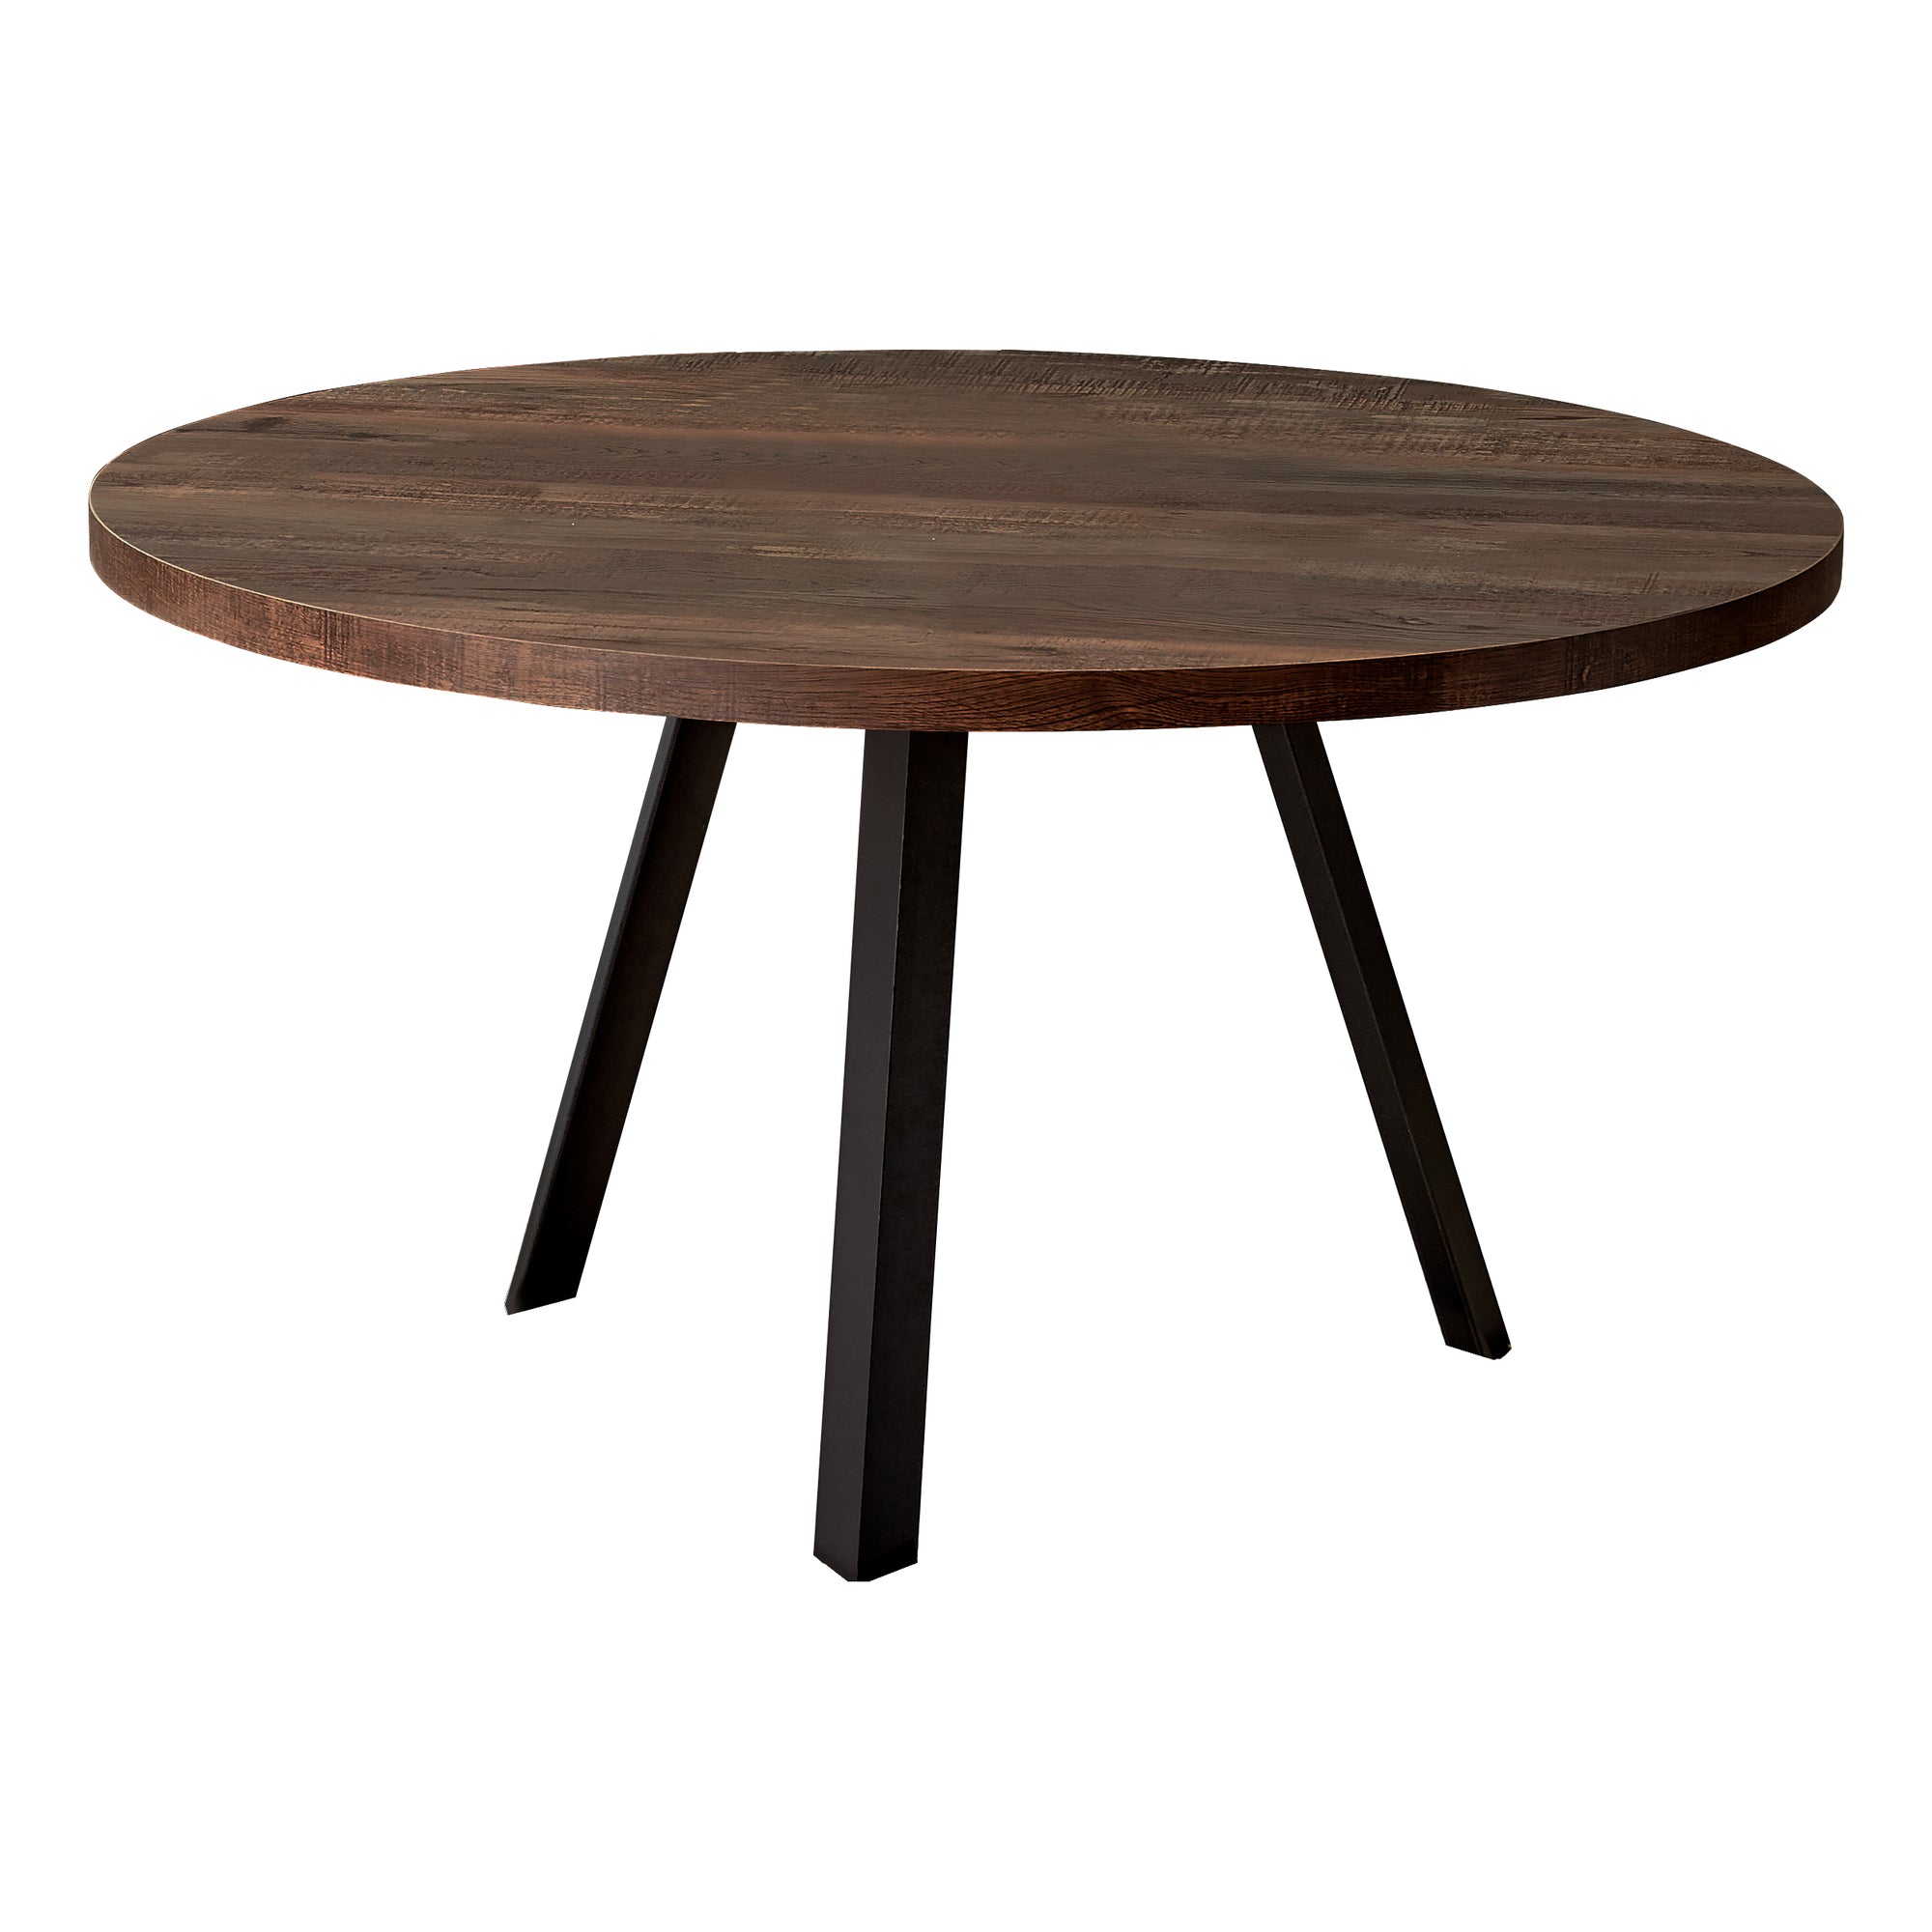 MN-437814    Coffee Table, Accent, Cocktail, Round, Living Room, 36"Dia, Metal Legs, Laminate, Brown Reclaimed Wood Look, Black, Contemporary, Industrial, Modern